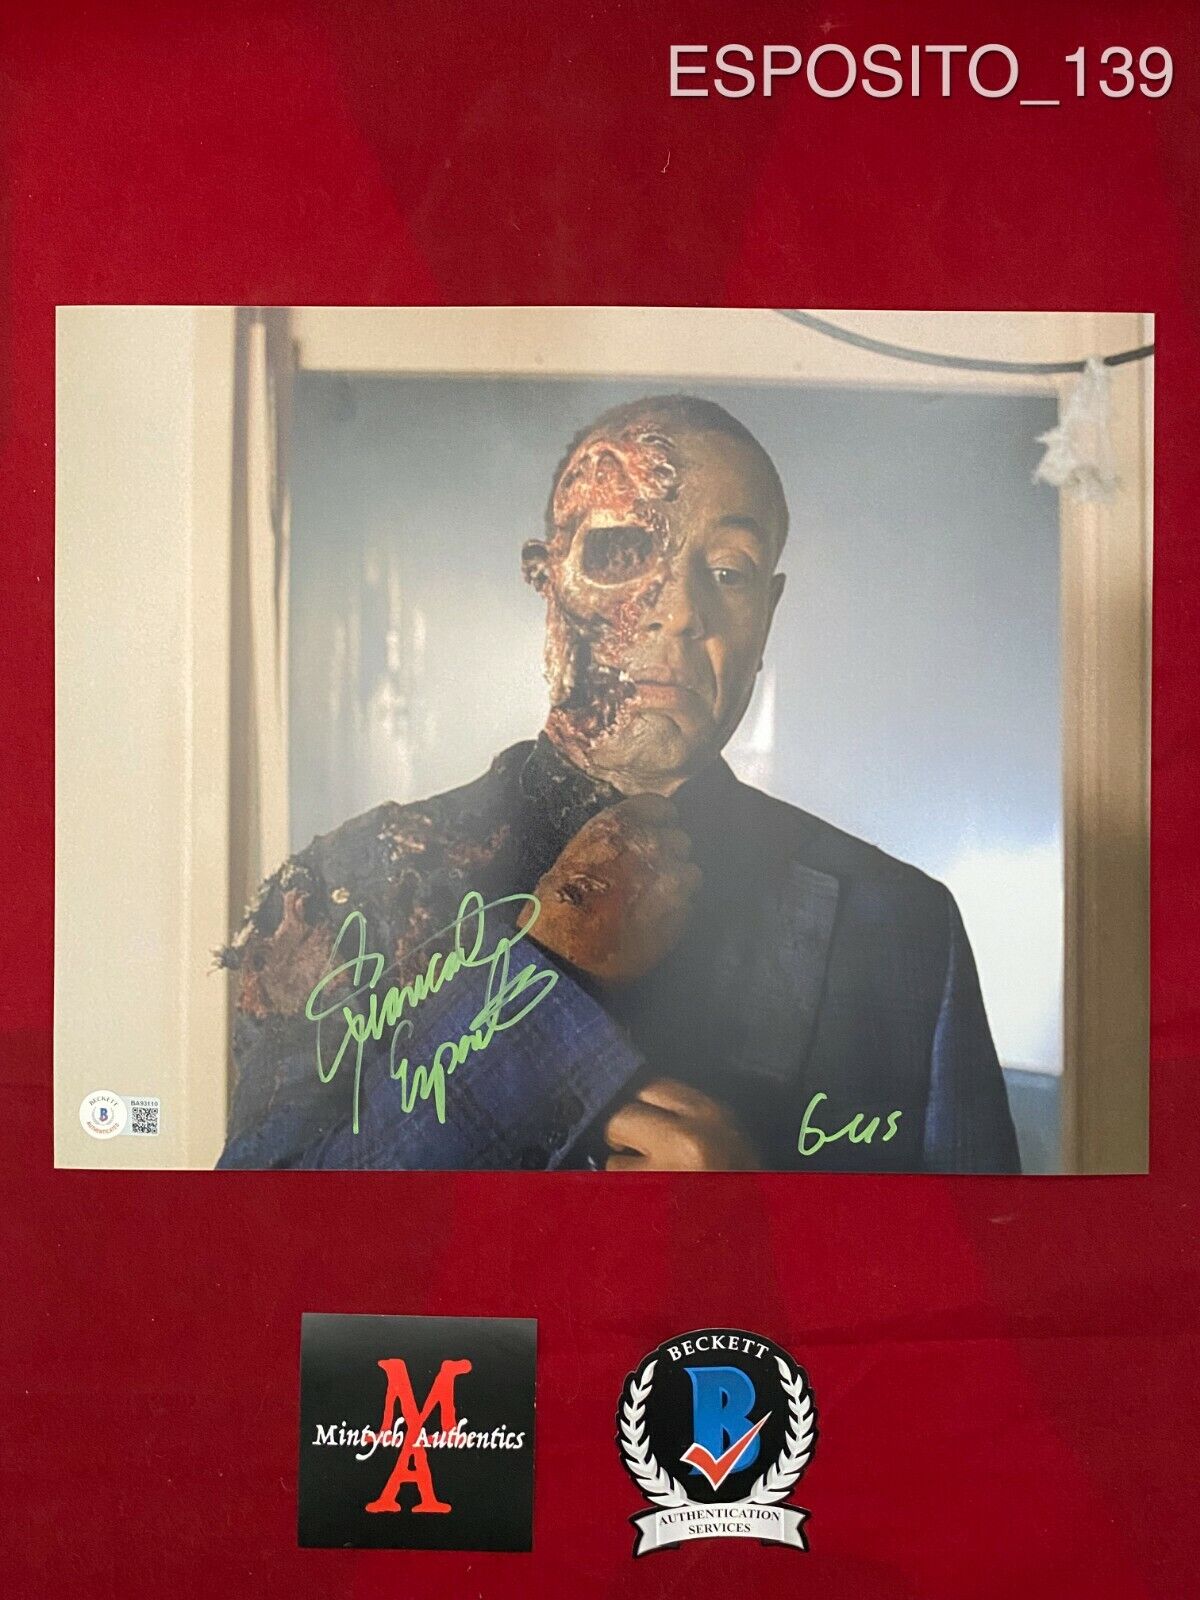 GIANCARLO ESPOSITO AUTOGRAPHED SIGNED 11x14 Photo Poster painting! BREAKING BAD! BECKETT COA!